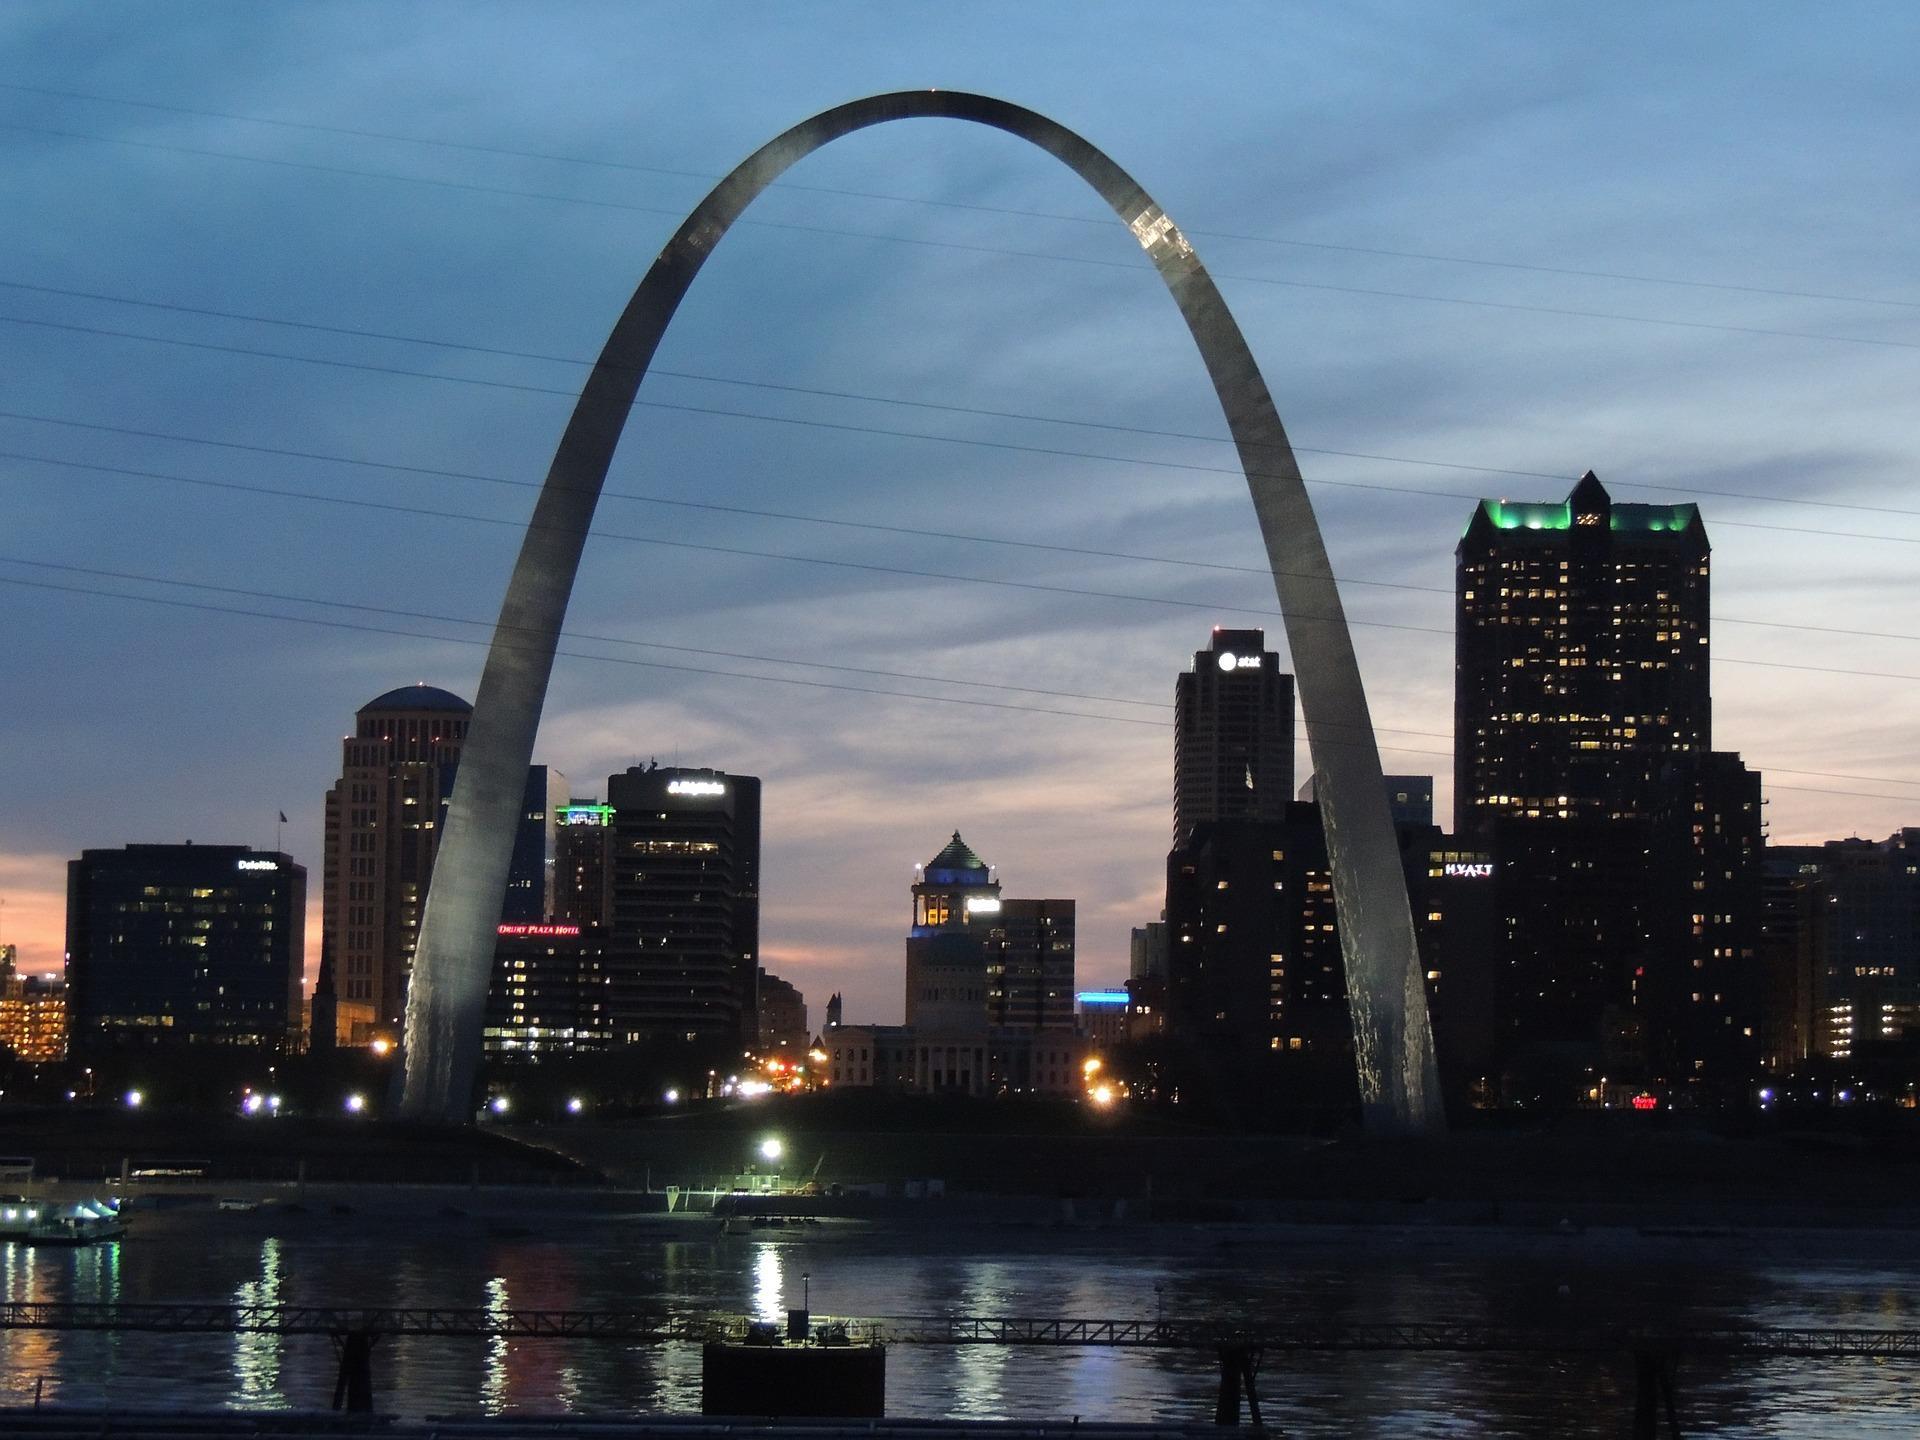 Name change to Gateway Arch National Park in Trump's hands